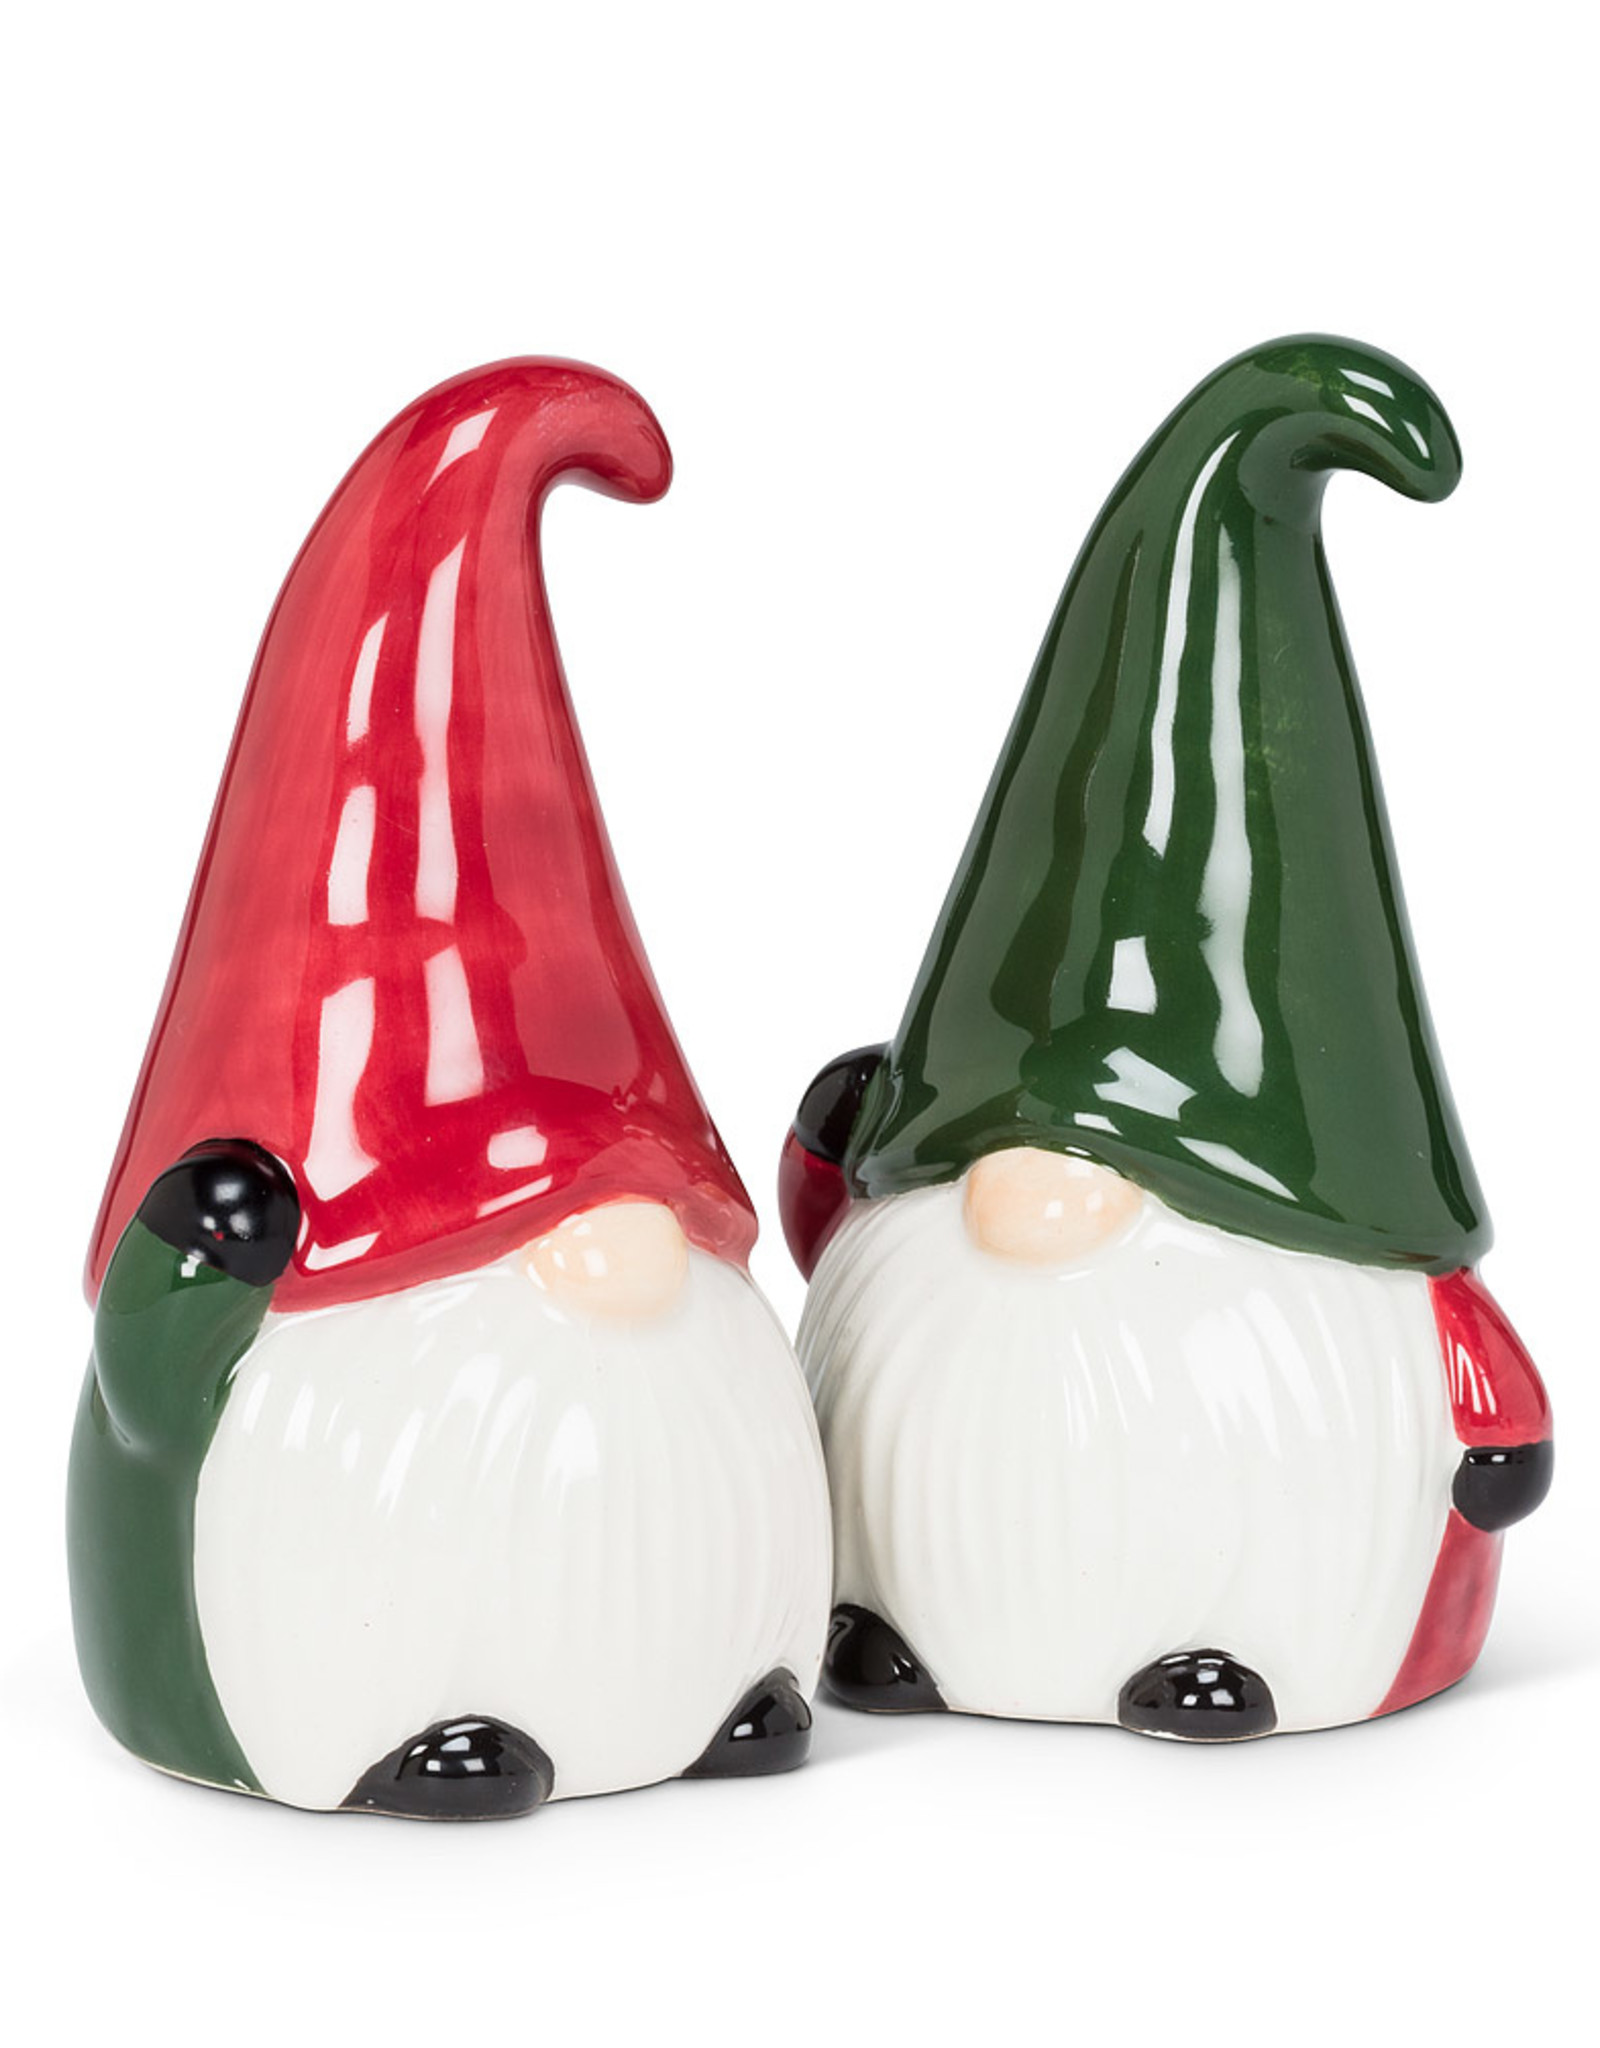 S&P Shakers-Gnomes-Set of 2